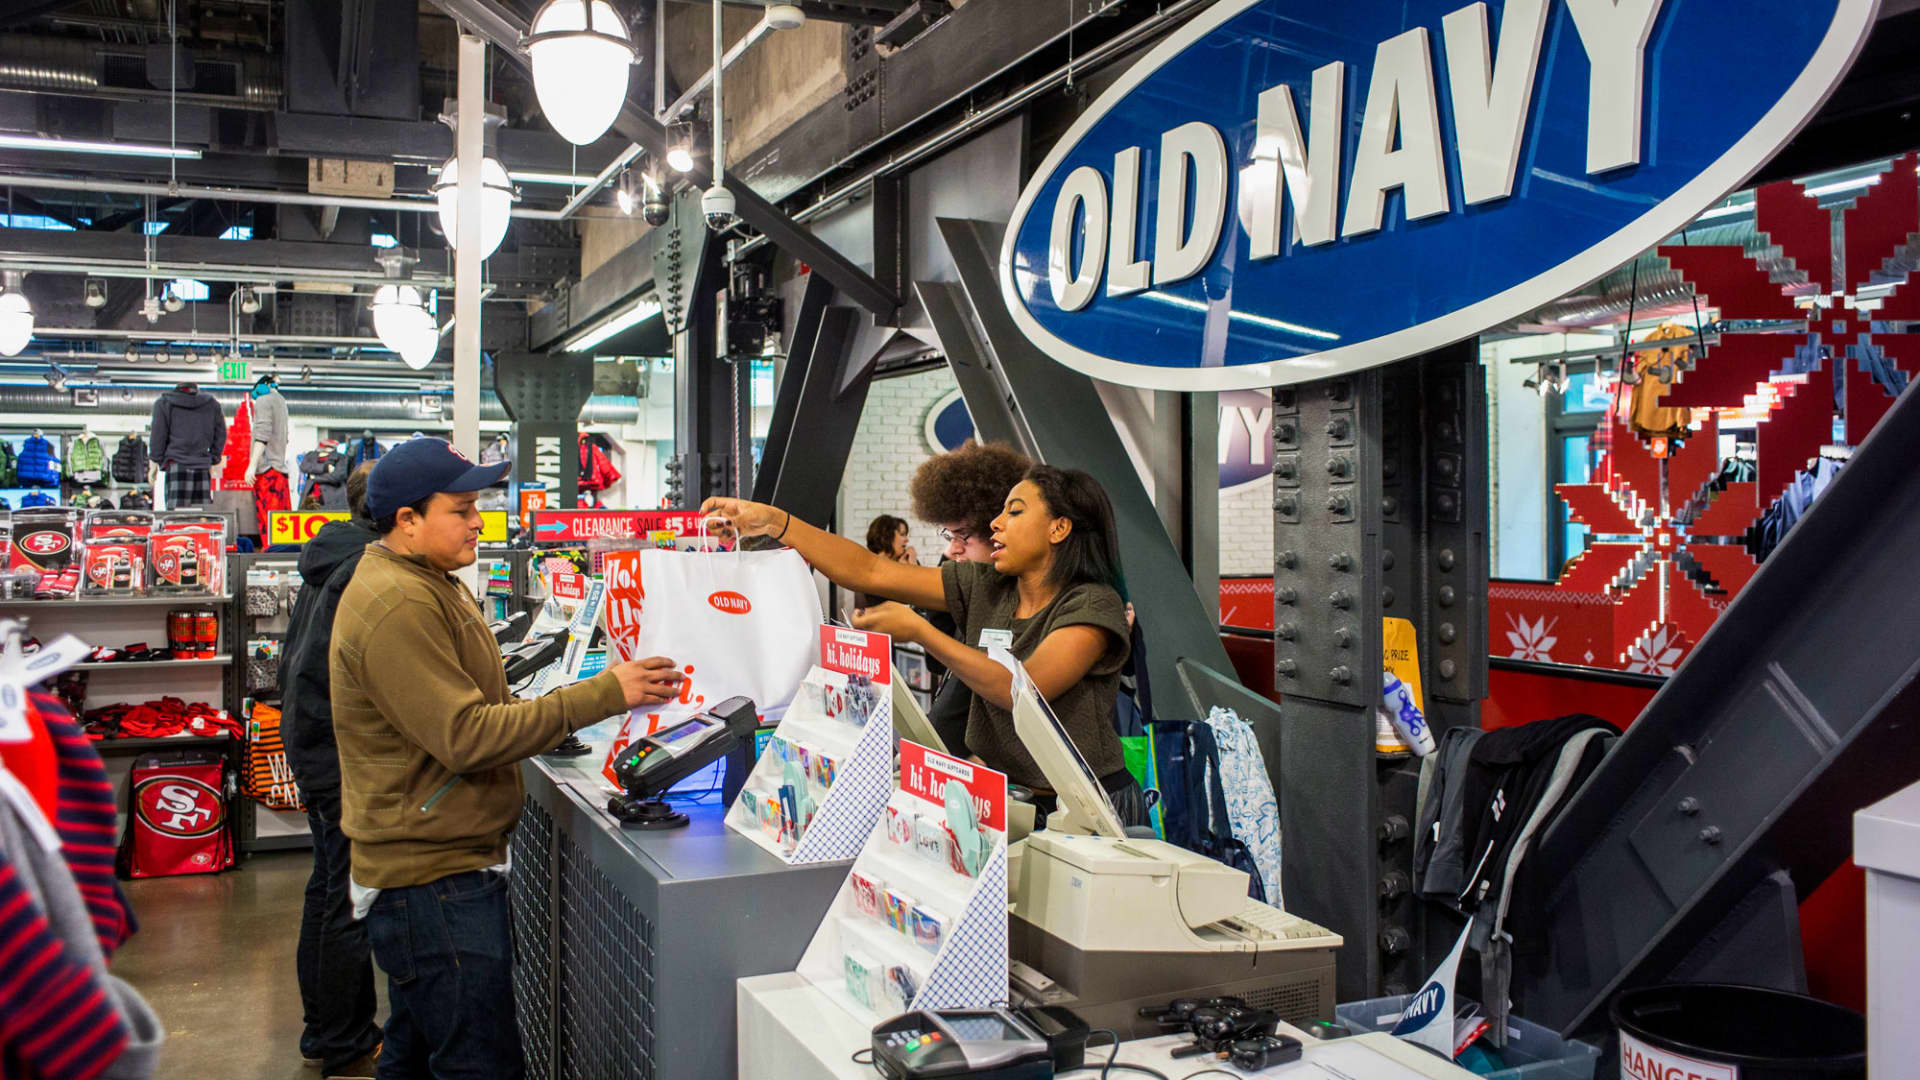 Old Navy CEO to exit as parent company Gap cuts sales guidance